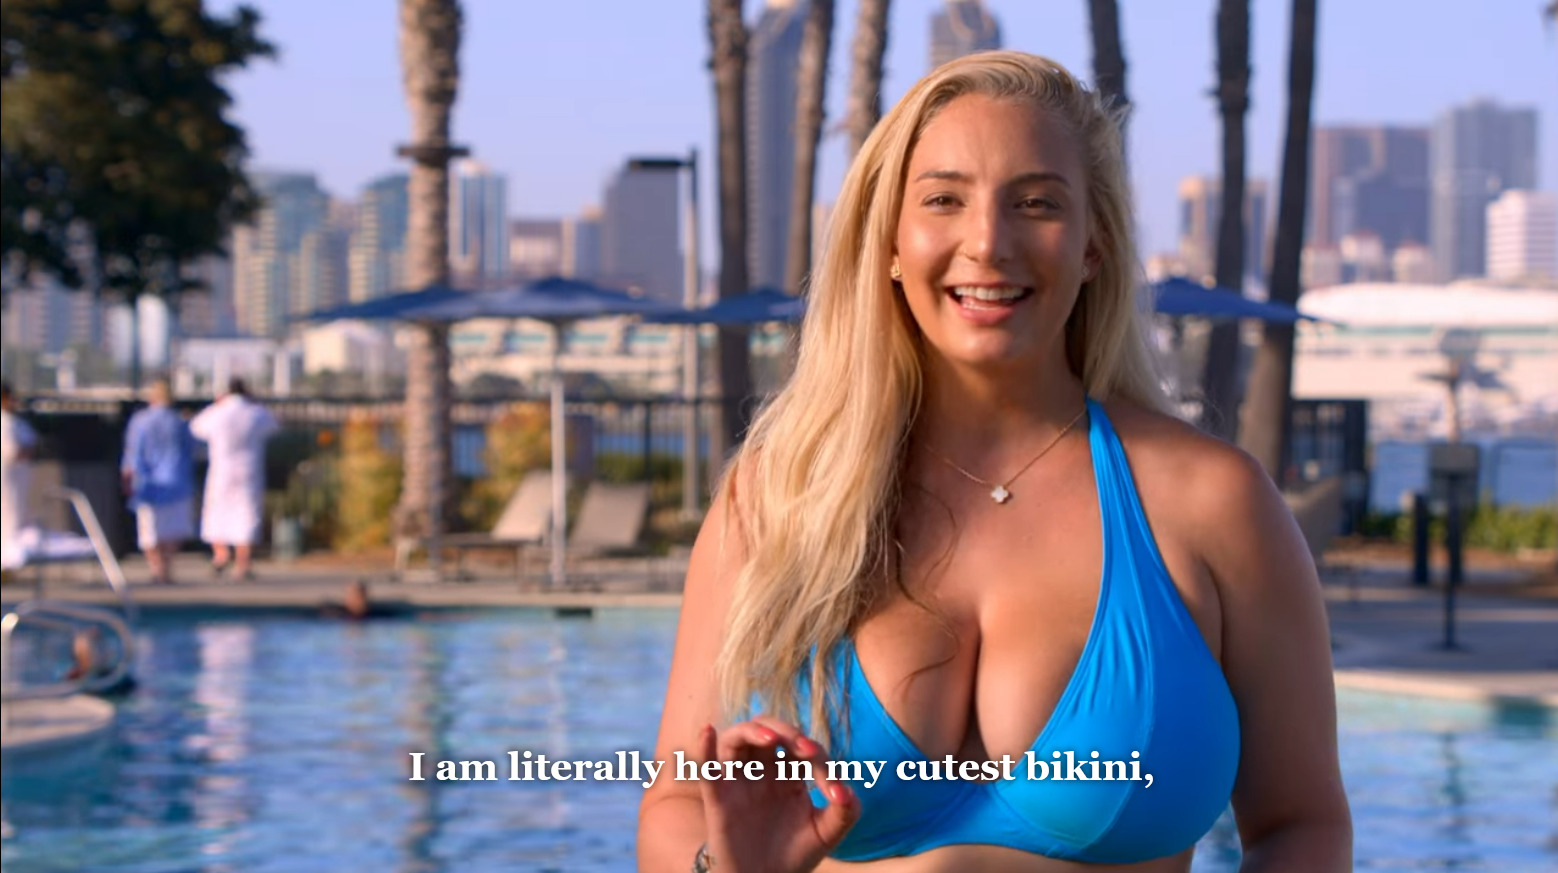 Lexi stands in front of the pool in a revealing swimsuit, saying "I am literally here in my cutest bikini."